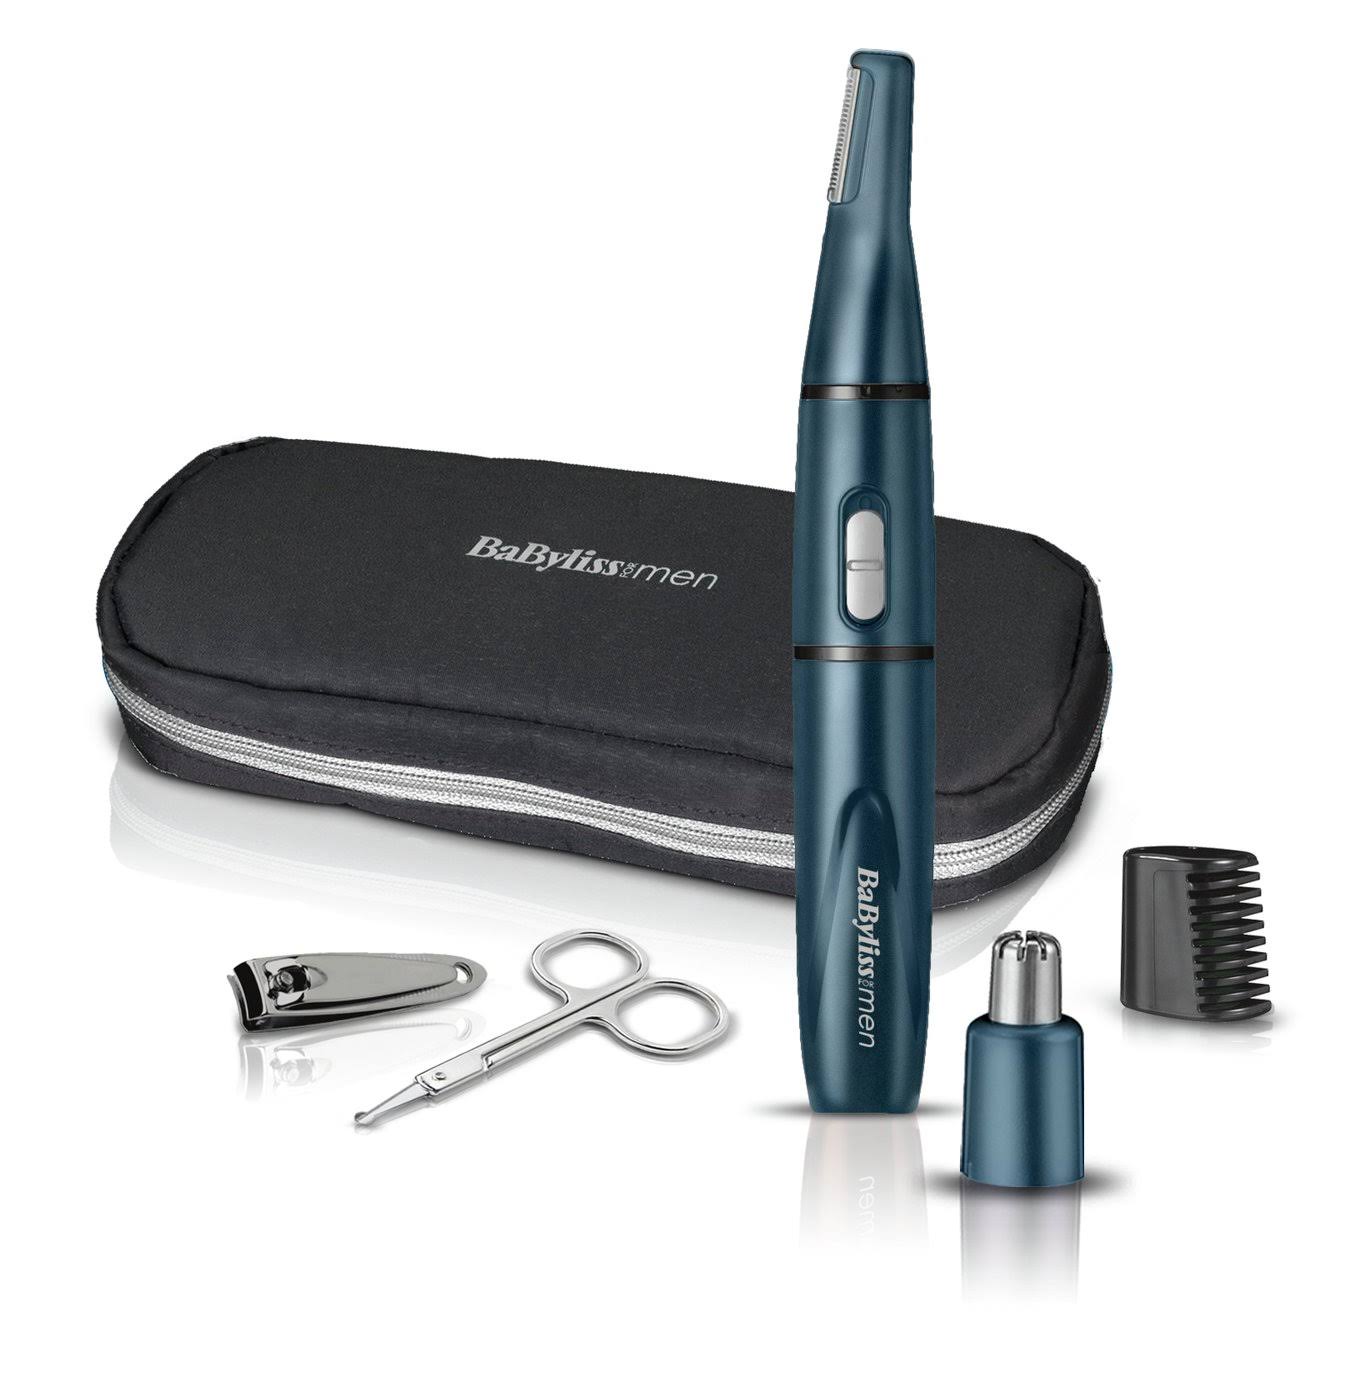 Babyliss 7058DGU 5In1 Personal Grooming Kit Gift Set